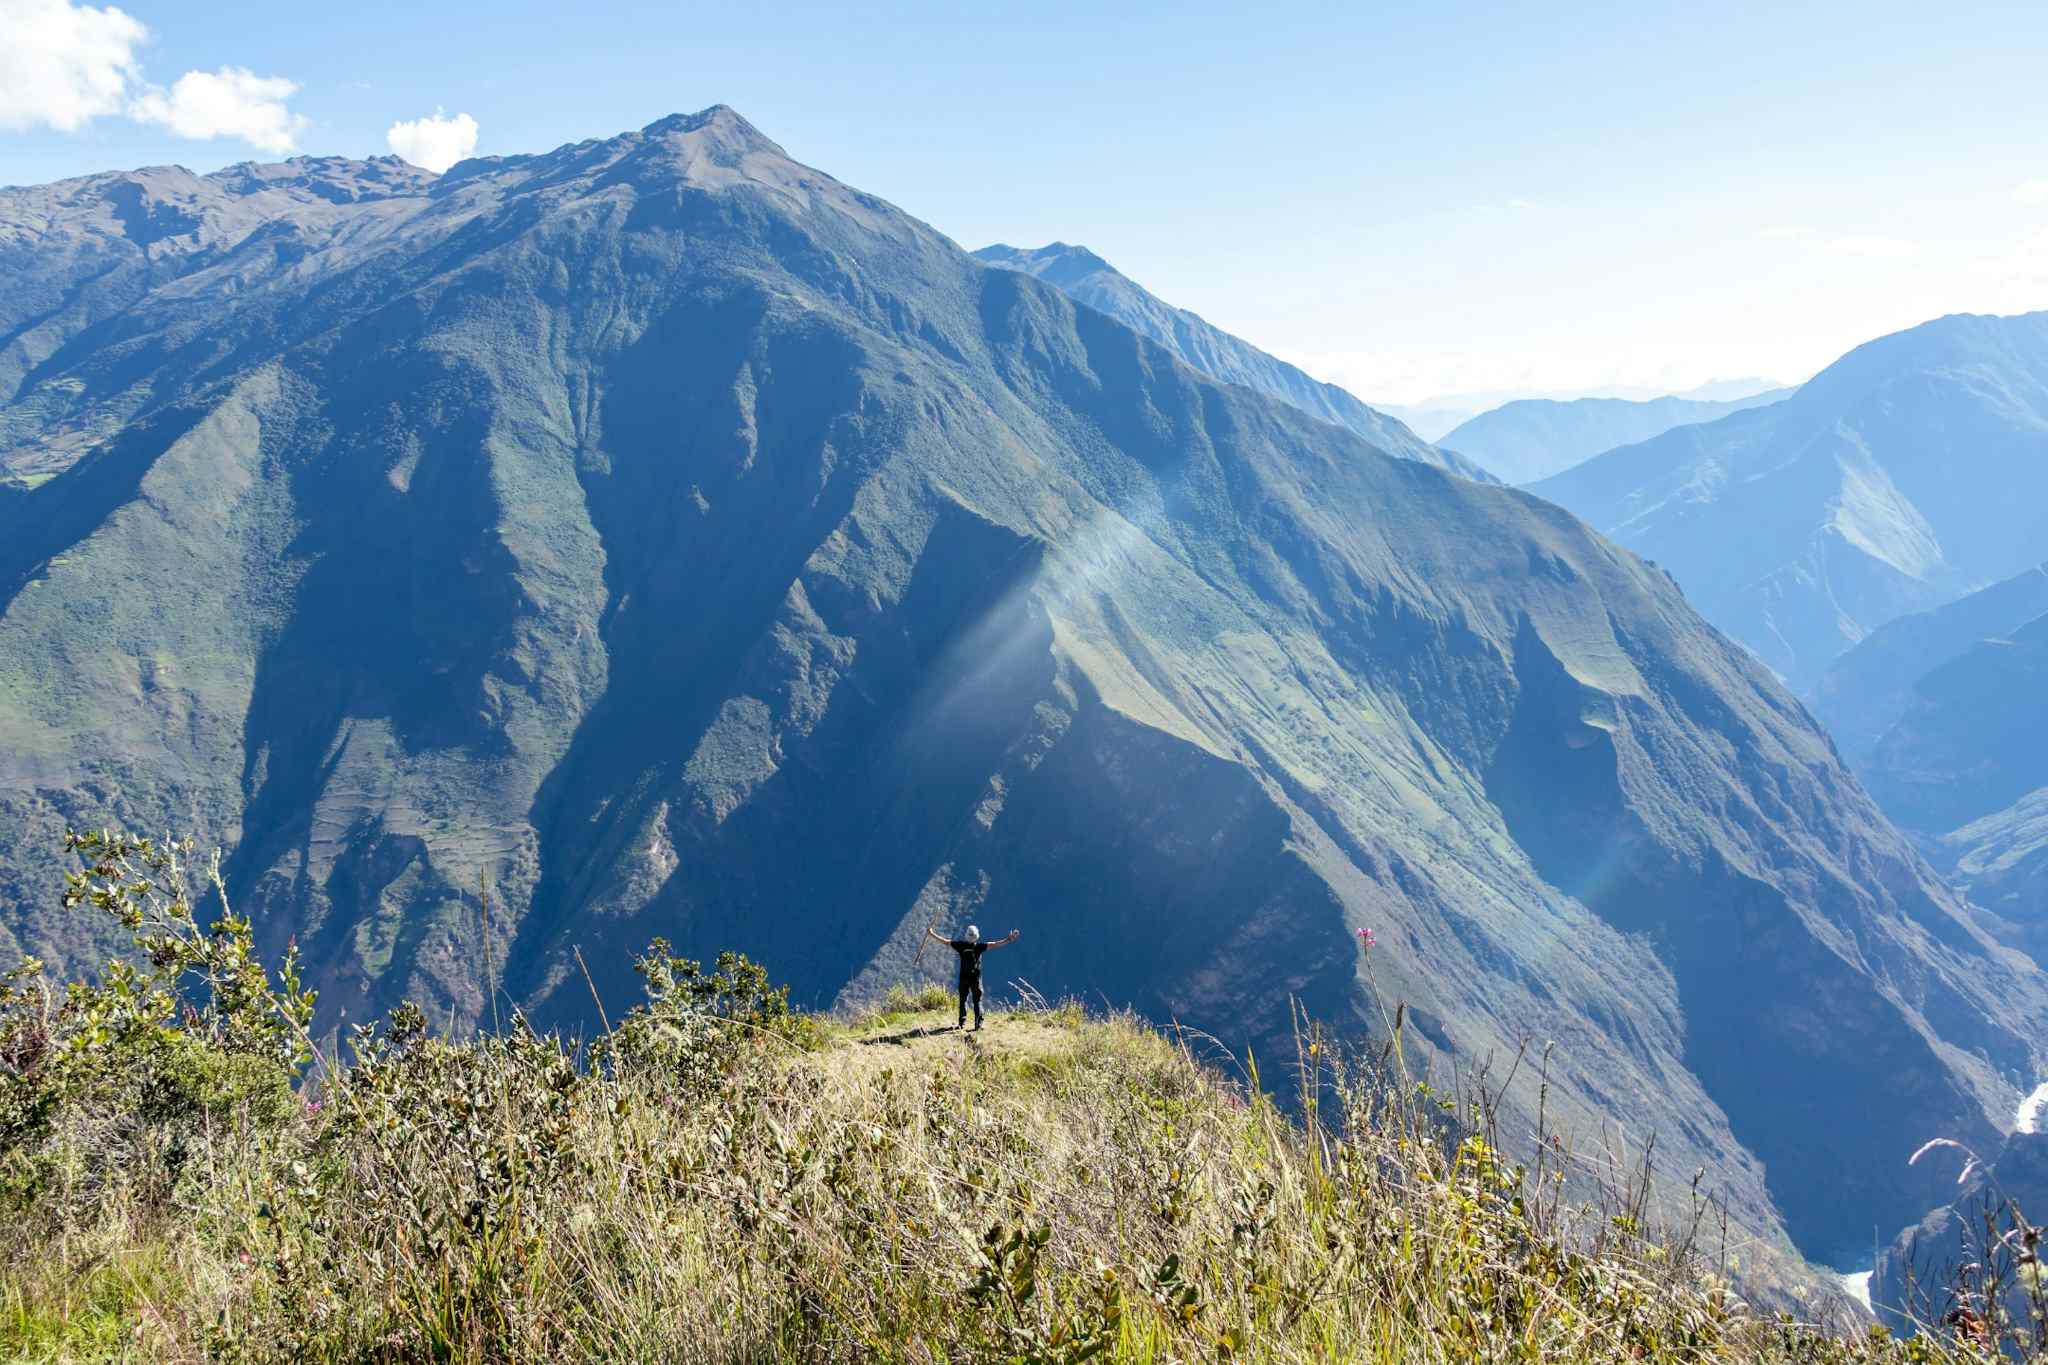 Hiker above the Apurimac Canyon on the Choquequirao Trek Photo: Canva link: https://www.canva.com/photos/MADnMxovDSE-young-hiker-man-trekking-with-backpack-in-peruvian-andes-mountains-peru-south-america/